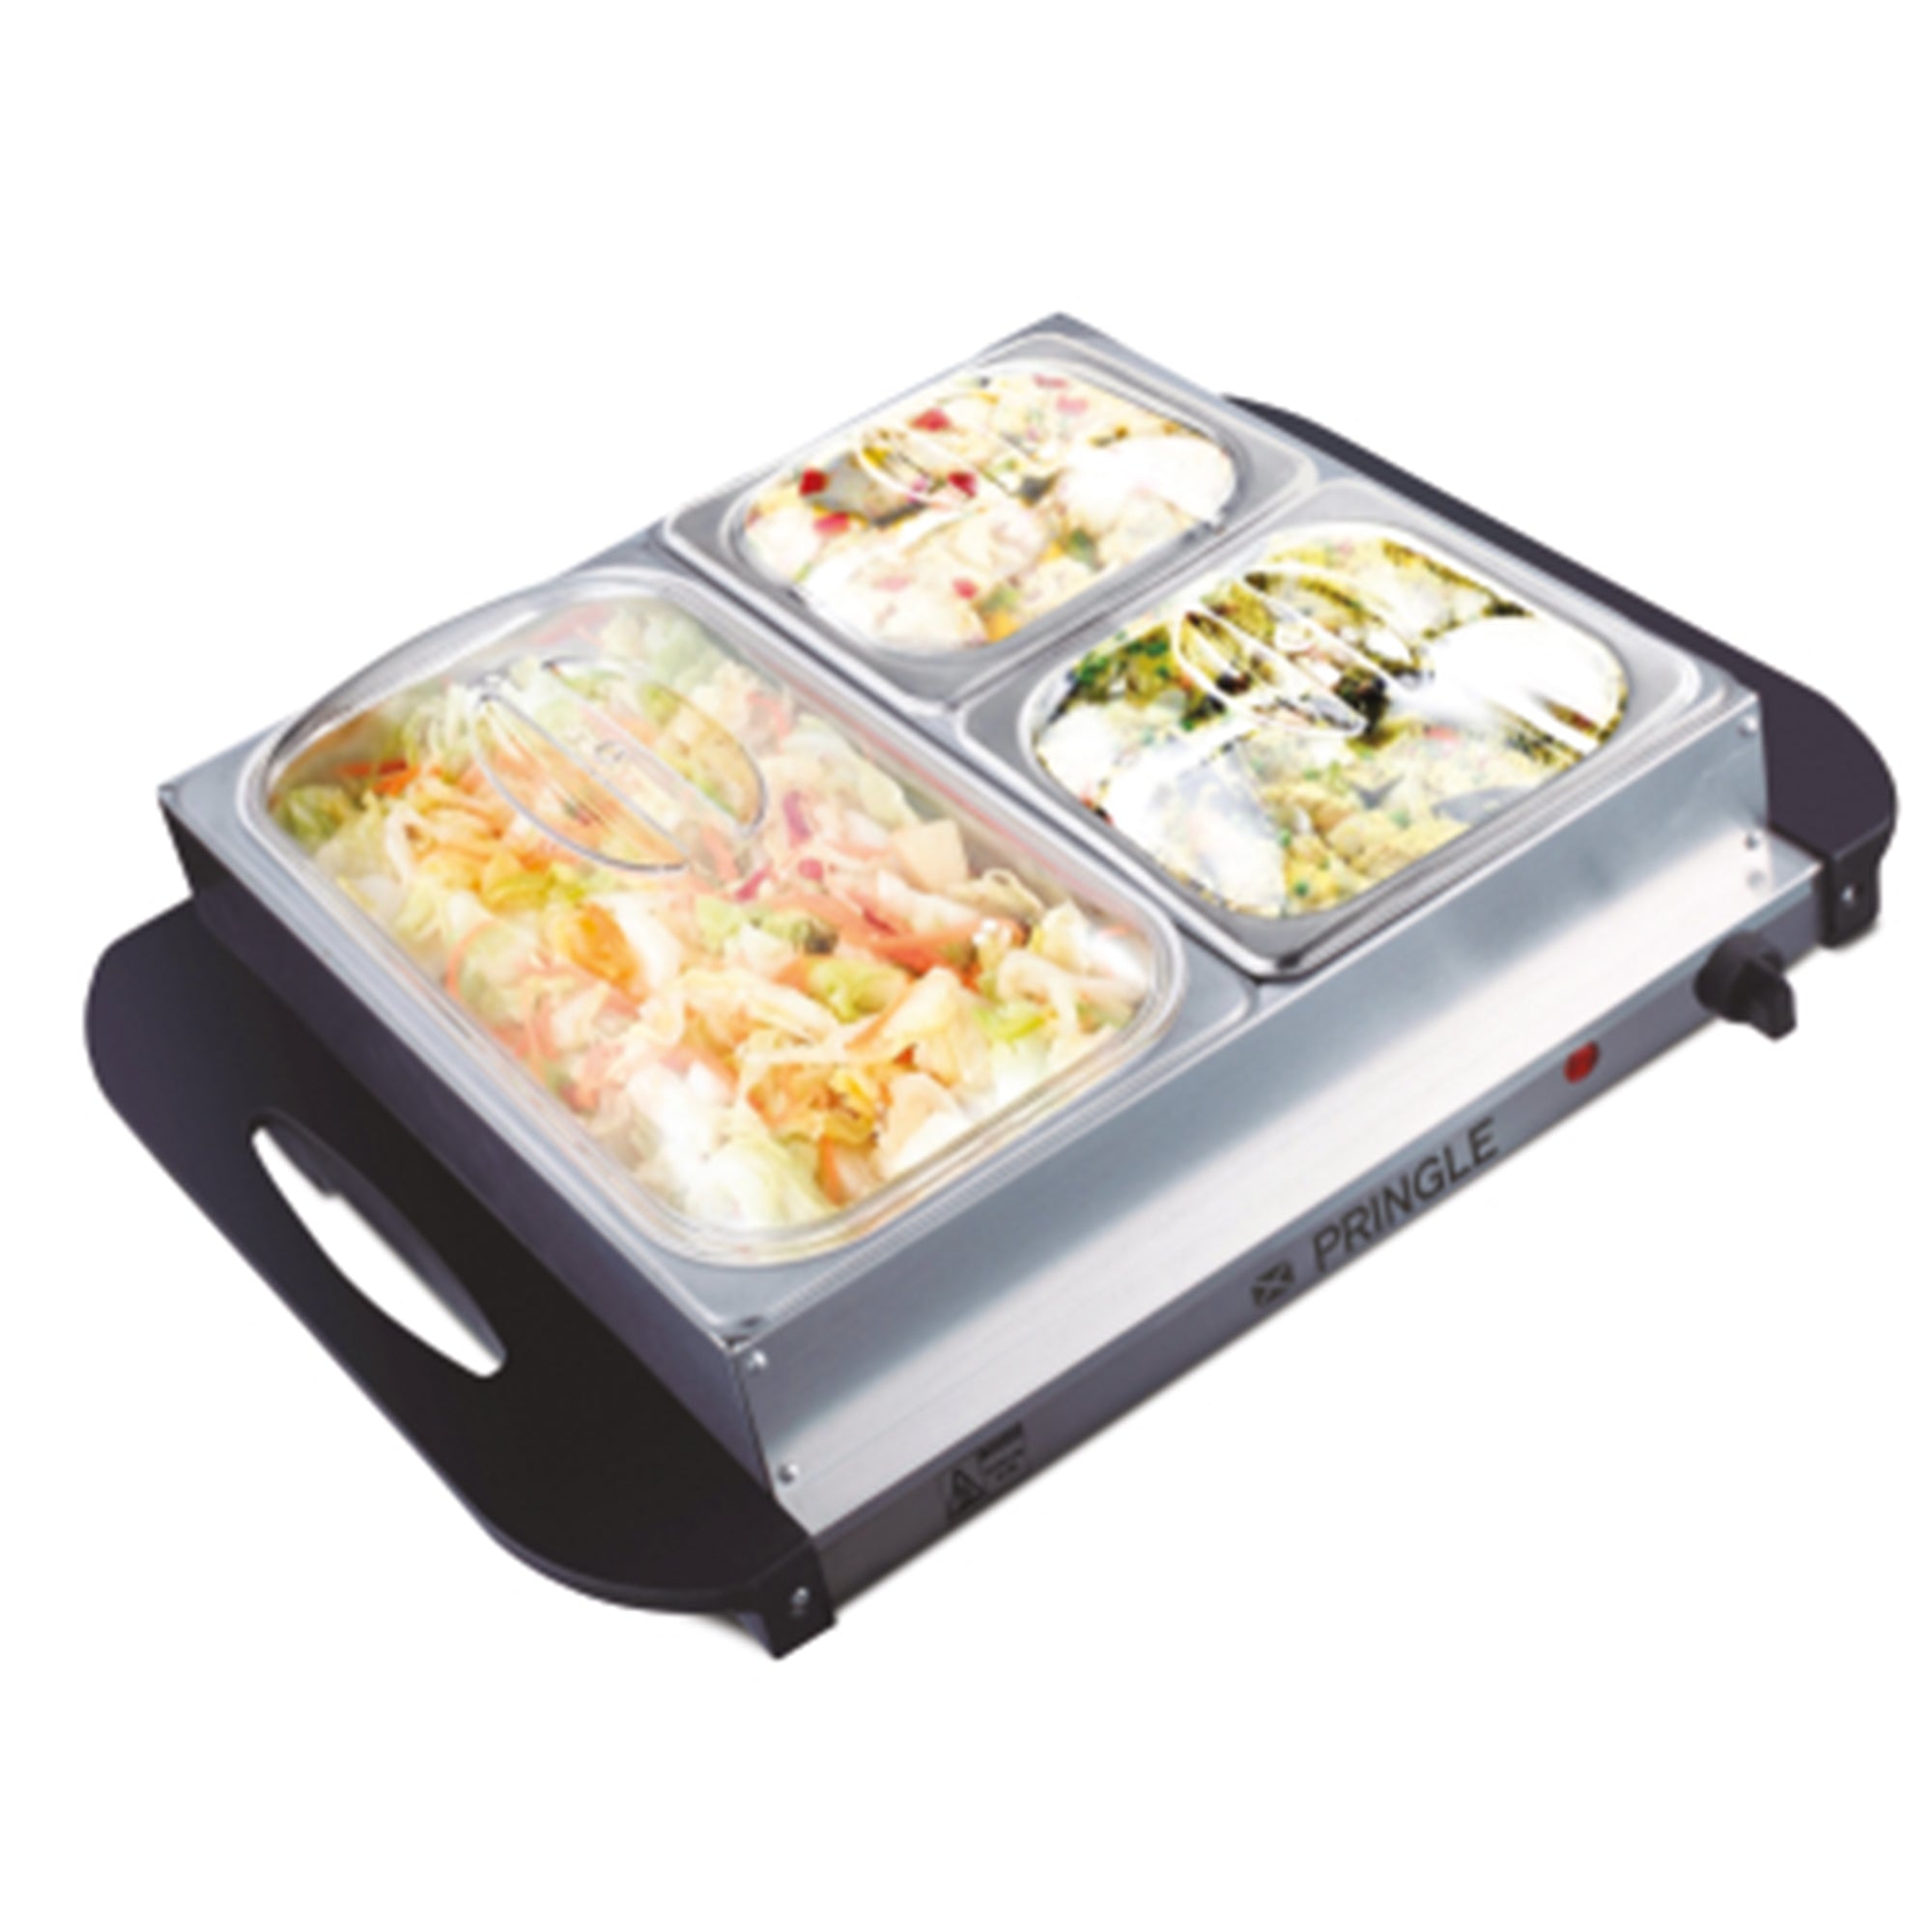 Food Warmer 1805| Buffet Server with 3 (1*2.5L+2*1.25L) containers| - Pringle Appliances